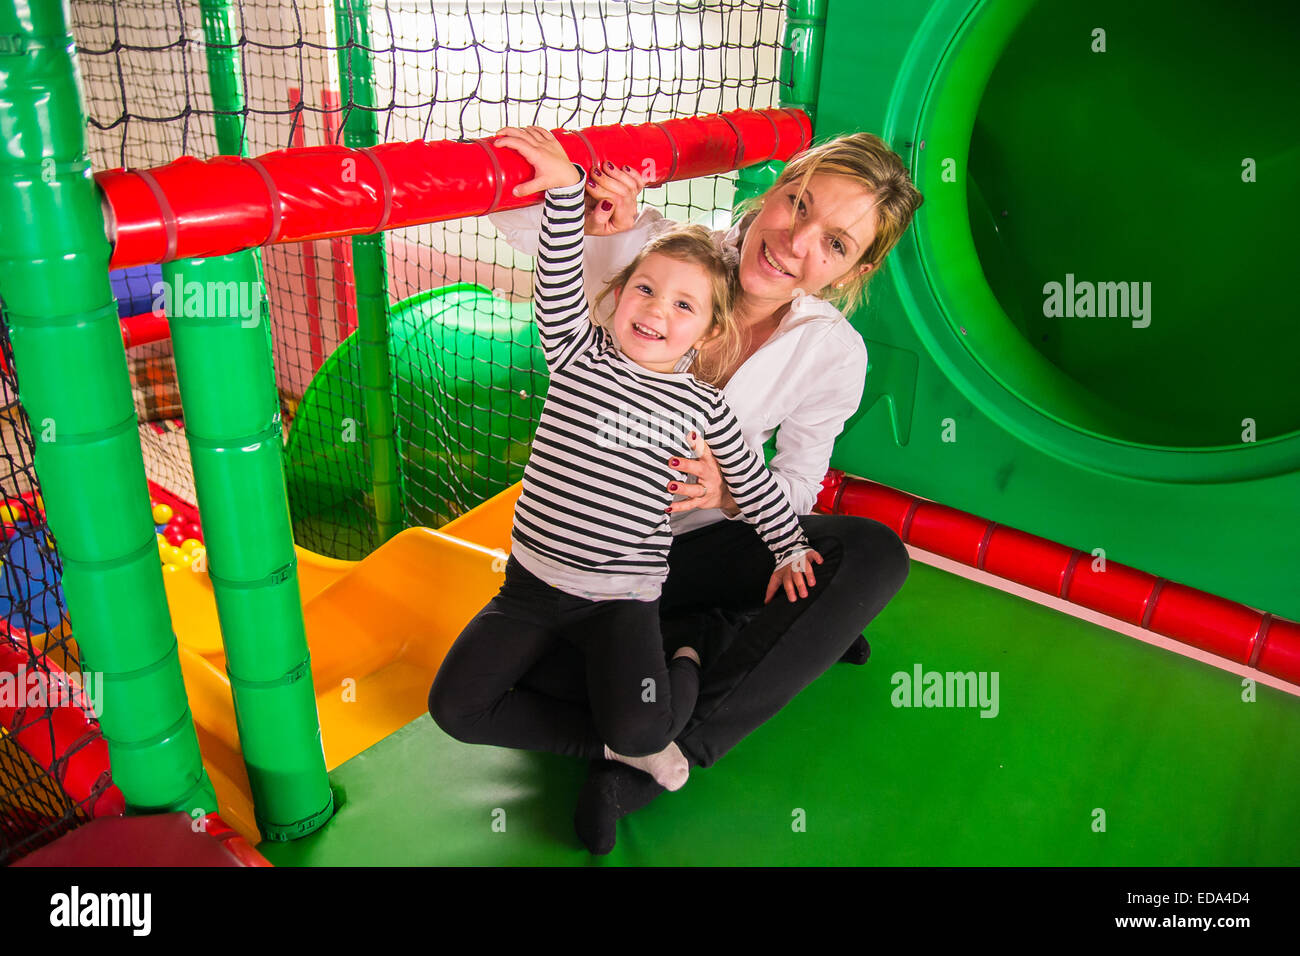 Mom and daughter in indoor playroom Stock Photo